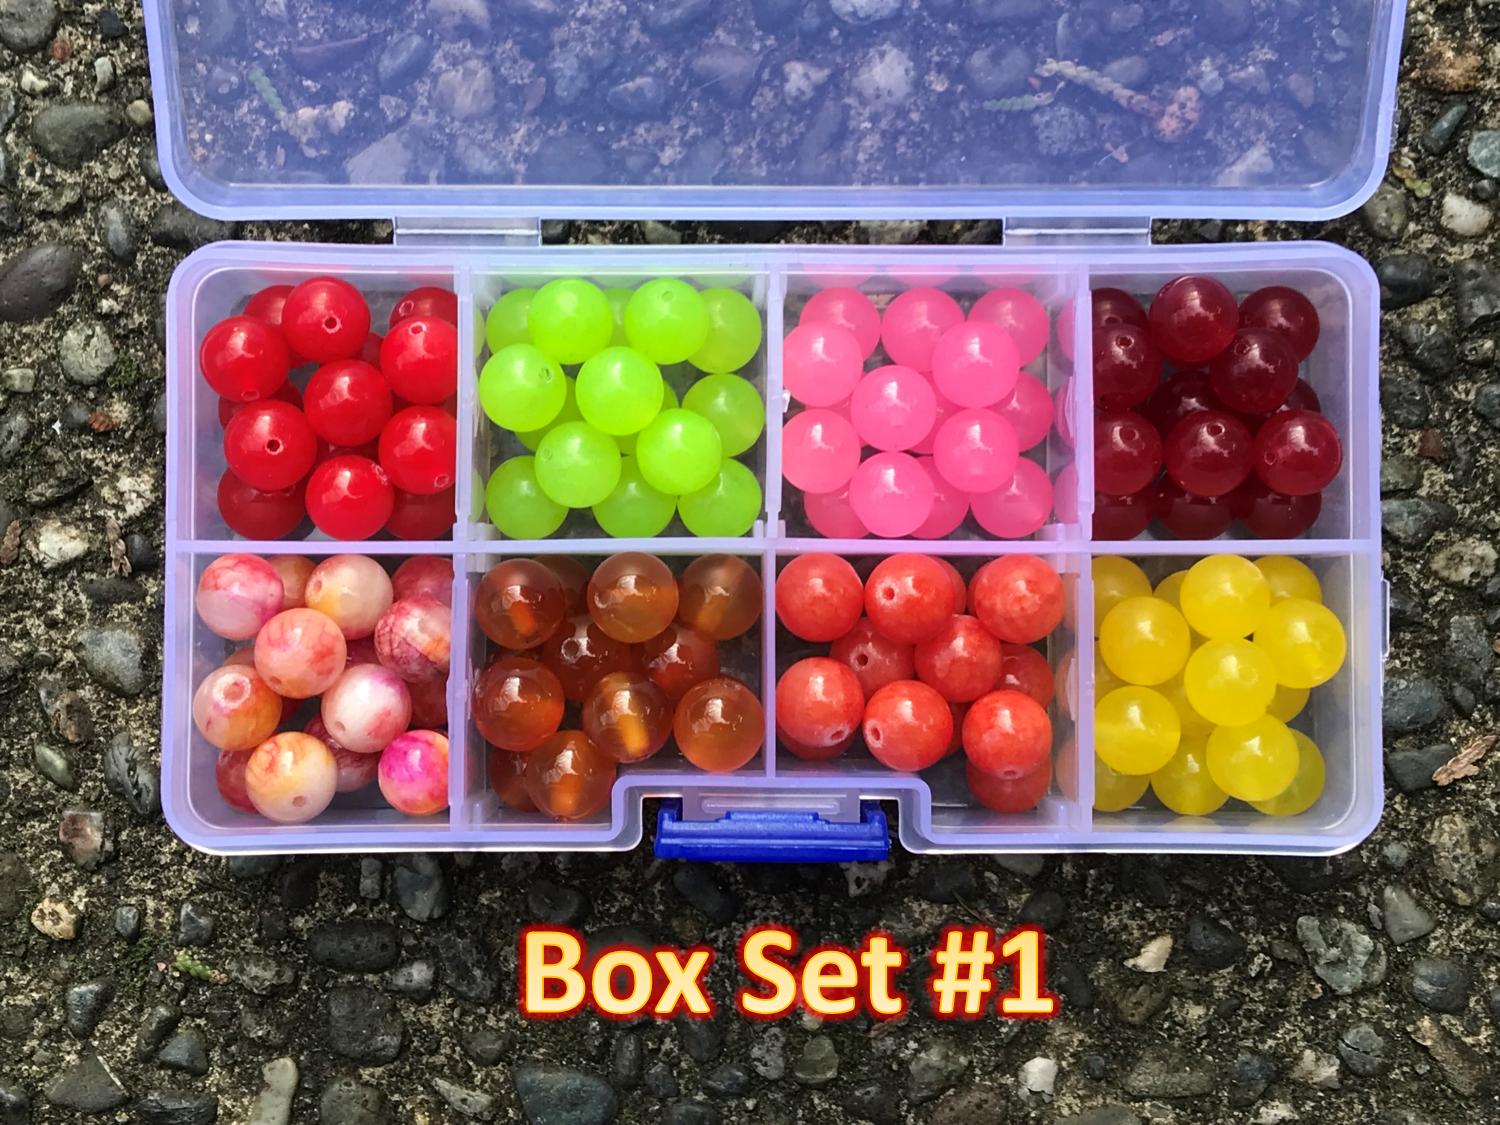 12 Color - 360 Count - 10mm Fishing Bead Combo Box - Stone Cold Fishing  Beads